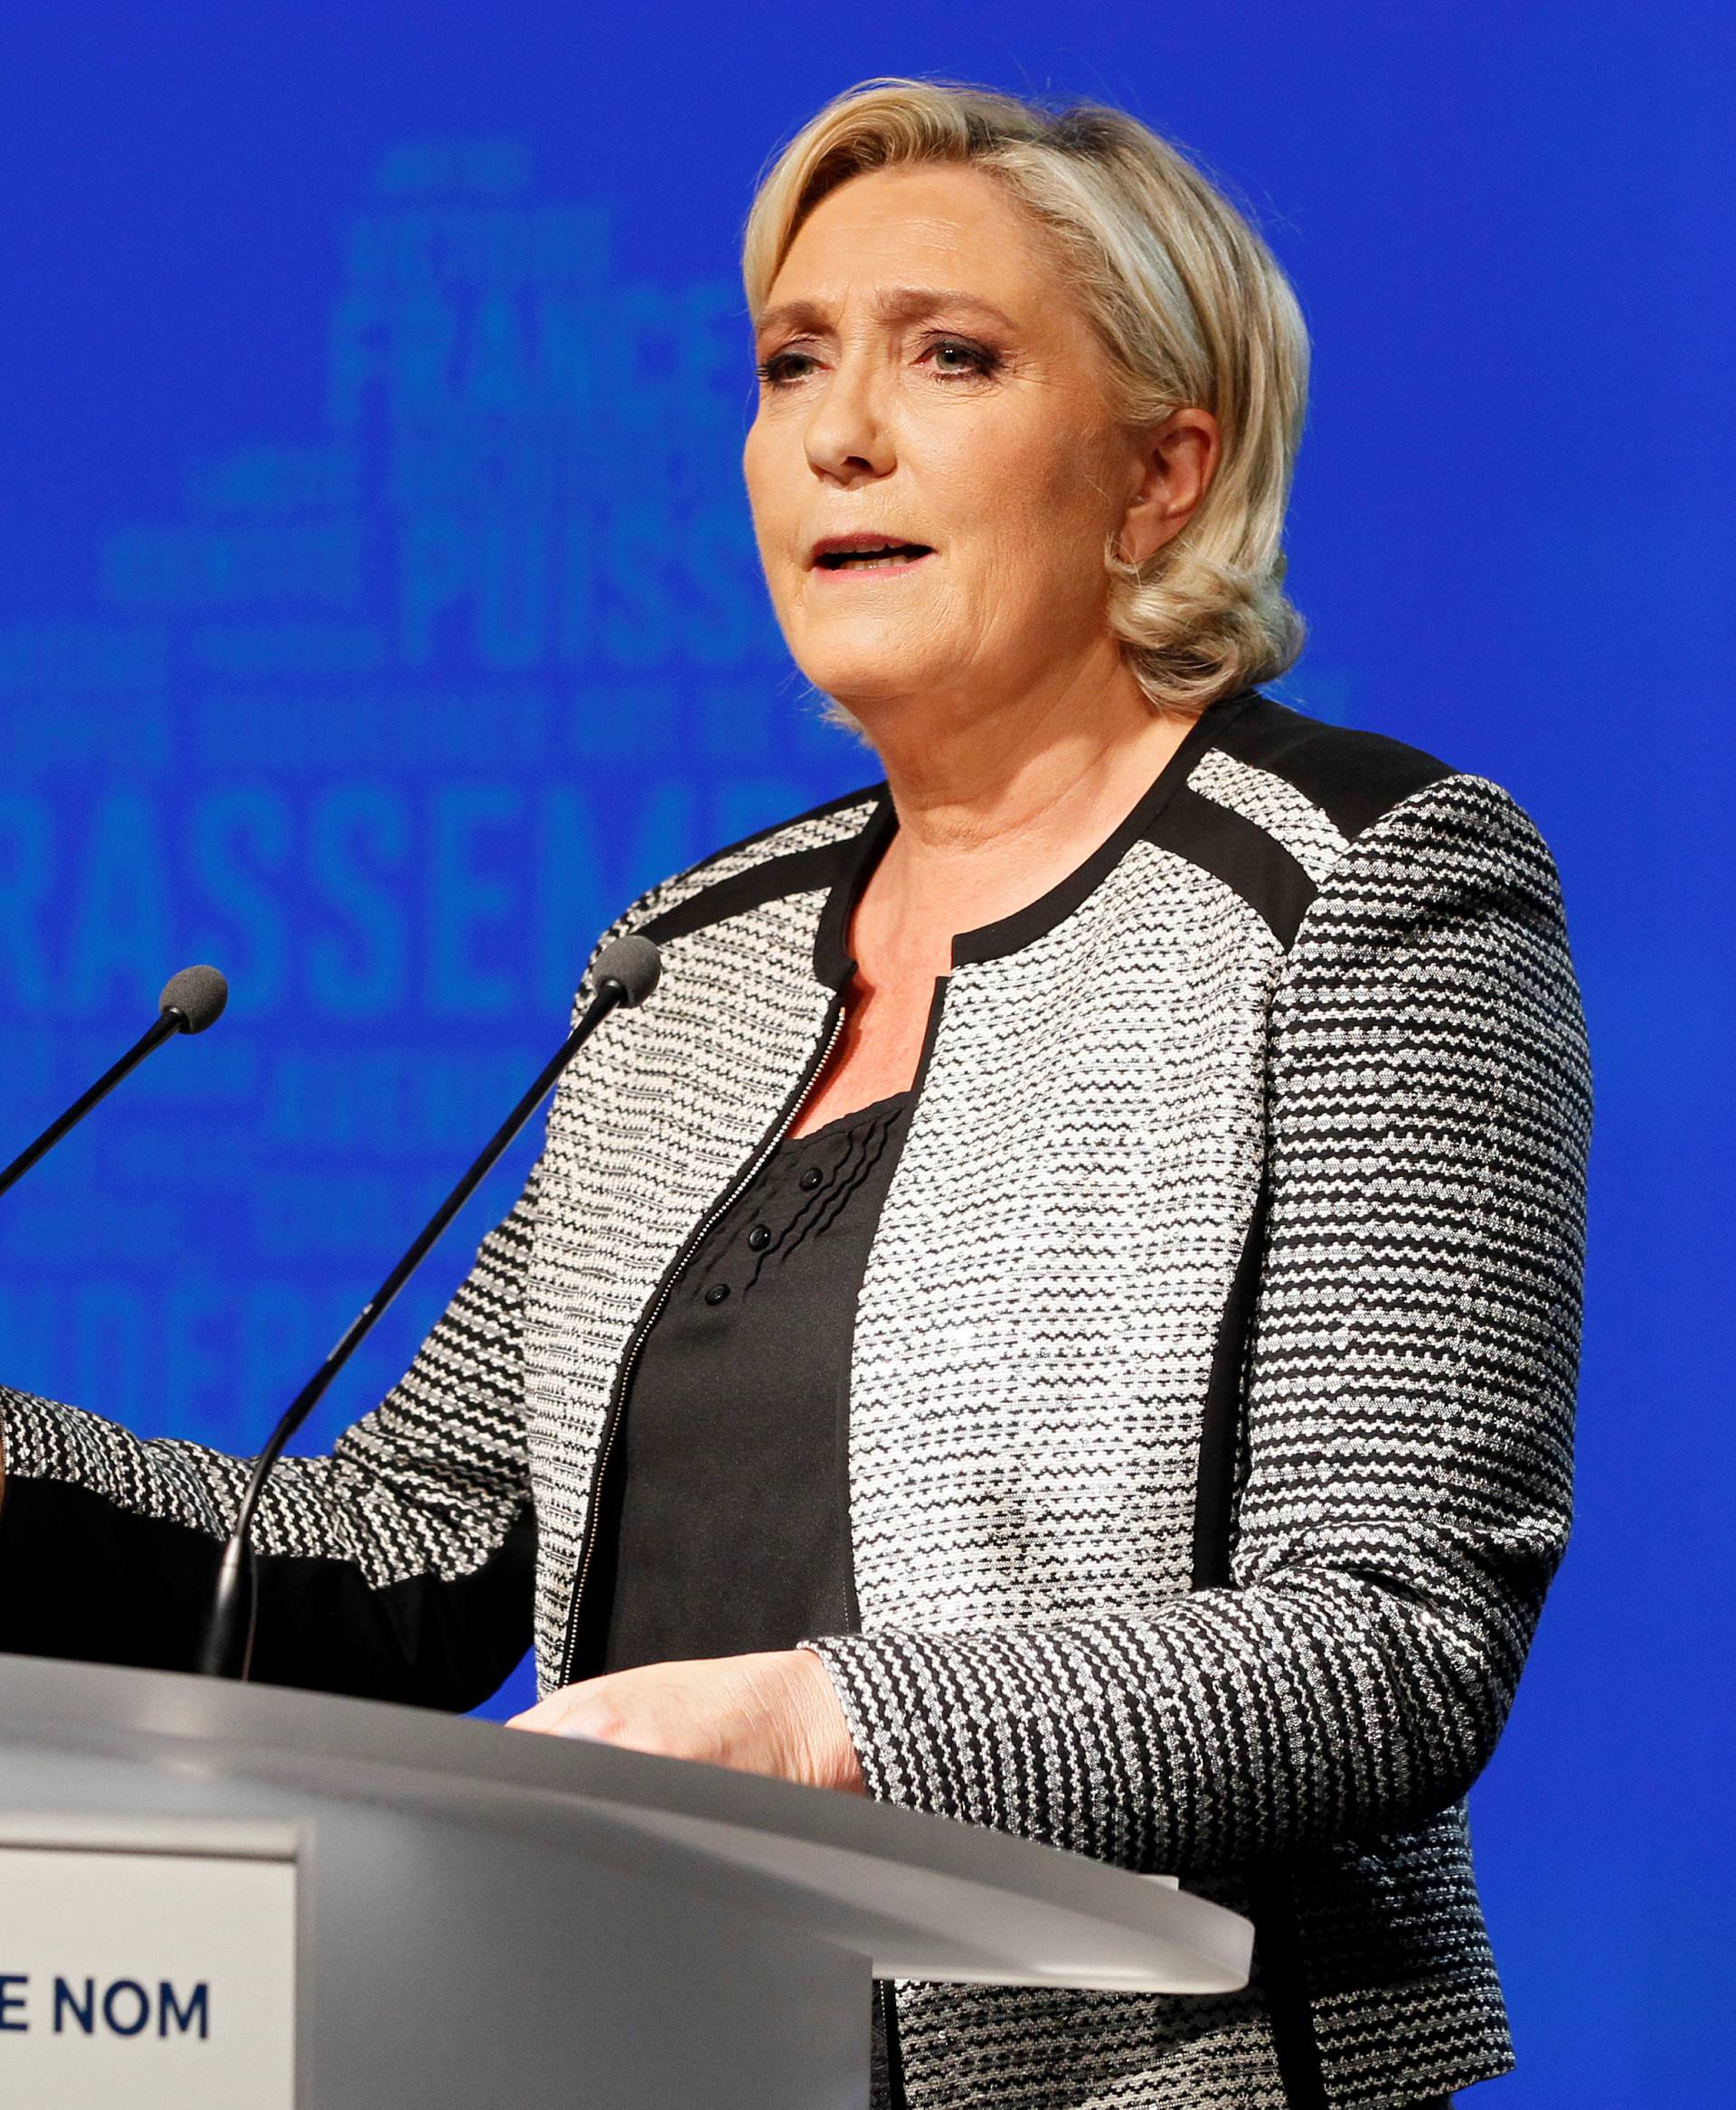 French politician Marine Le Pen delivers a speech to announce the new name of the far-right National Front political party, that becomes the National Rally (Rassemblement National) party, during a national council in Bron